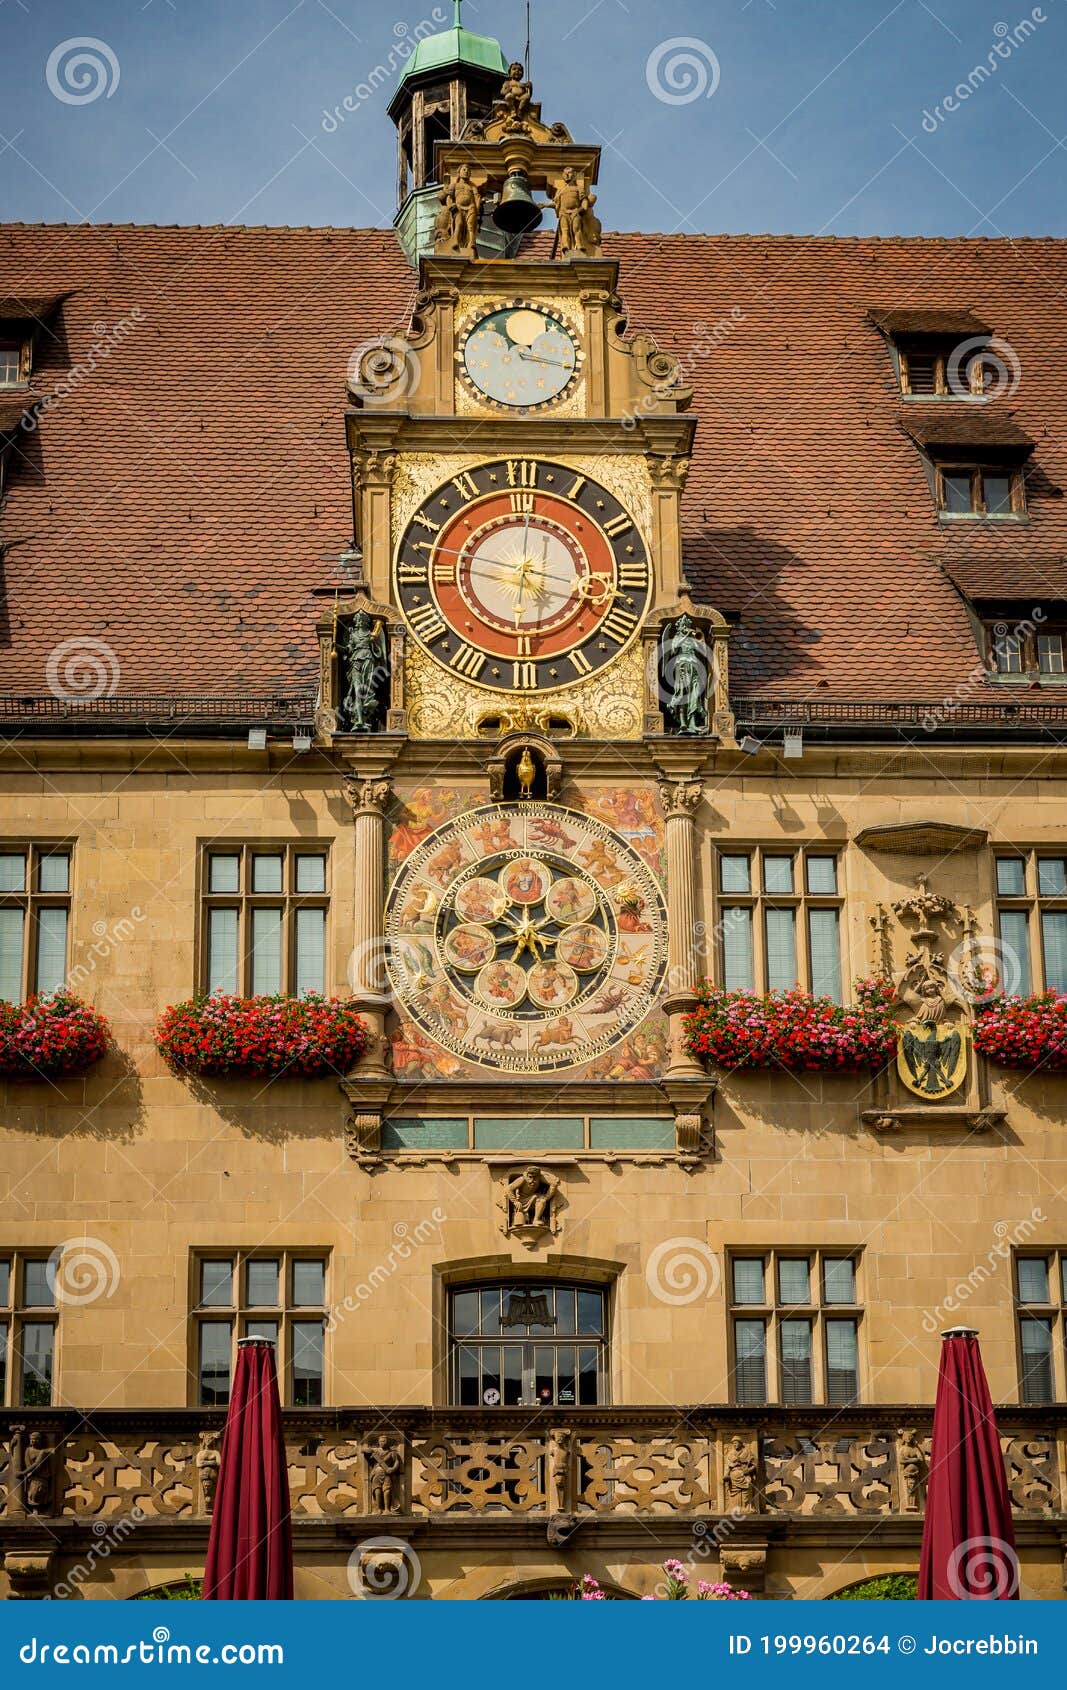 astronomical clock invented in 1590 by.isaak habrecht